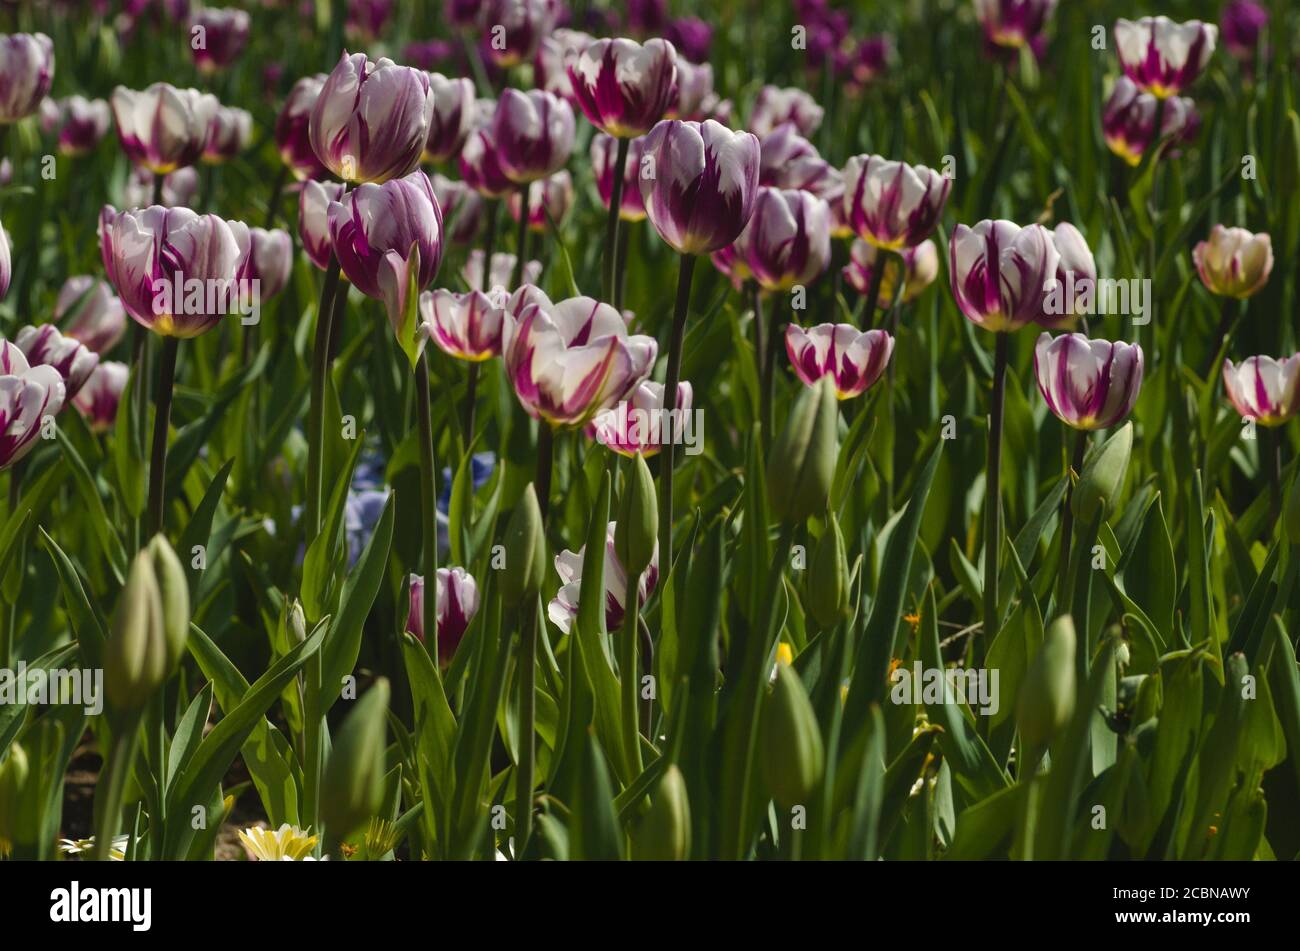 Artistically colored tulips proudly growing in the garden. With a blossom of base white color and random lines of vary sizes of pink, red, fuchsia. Stock Photo